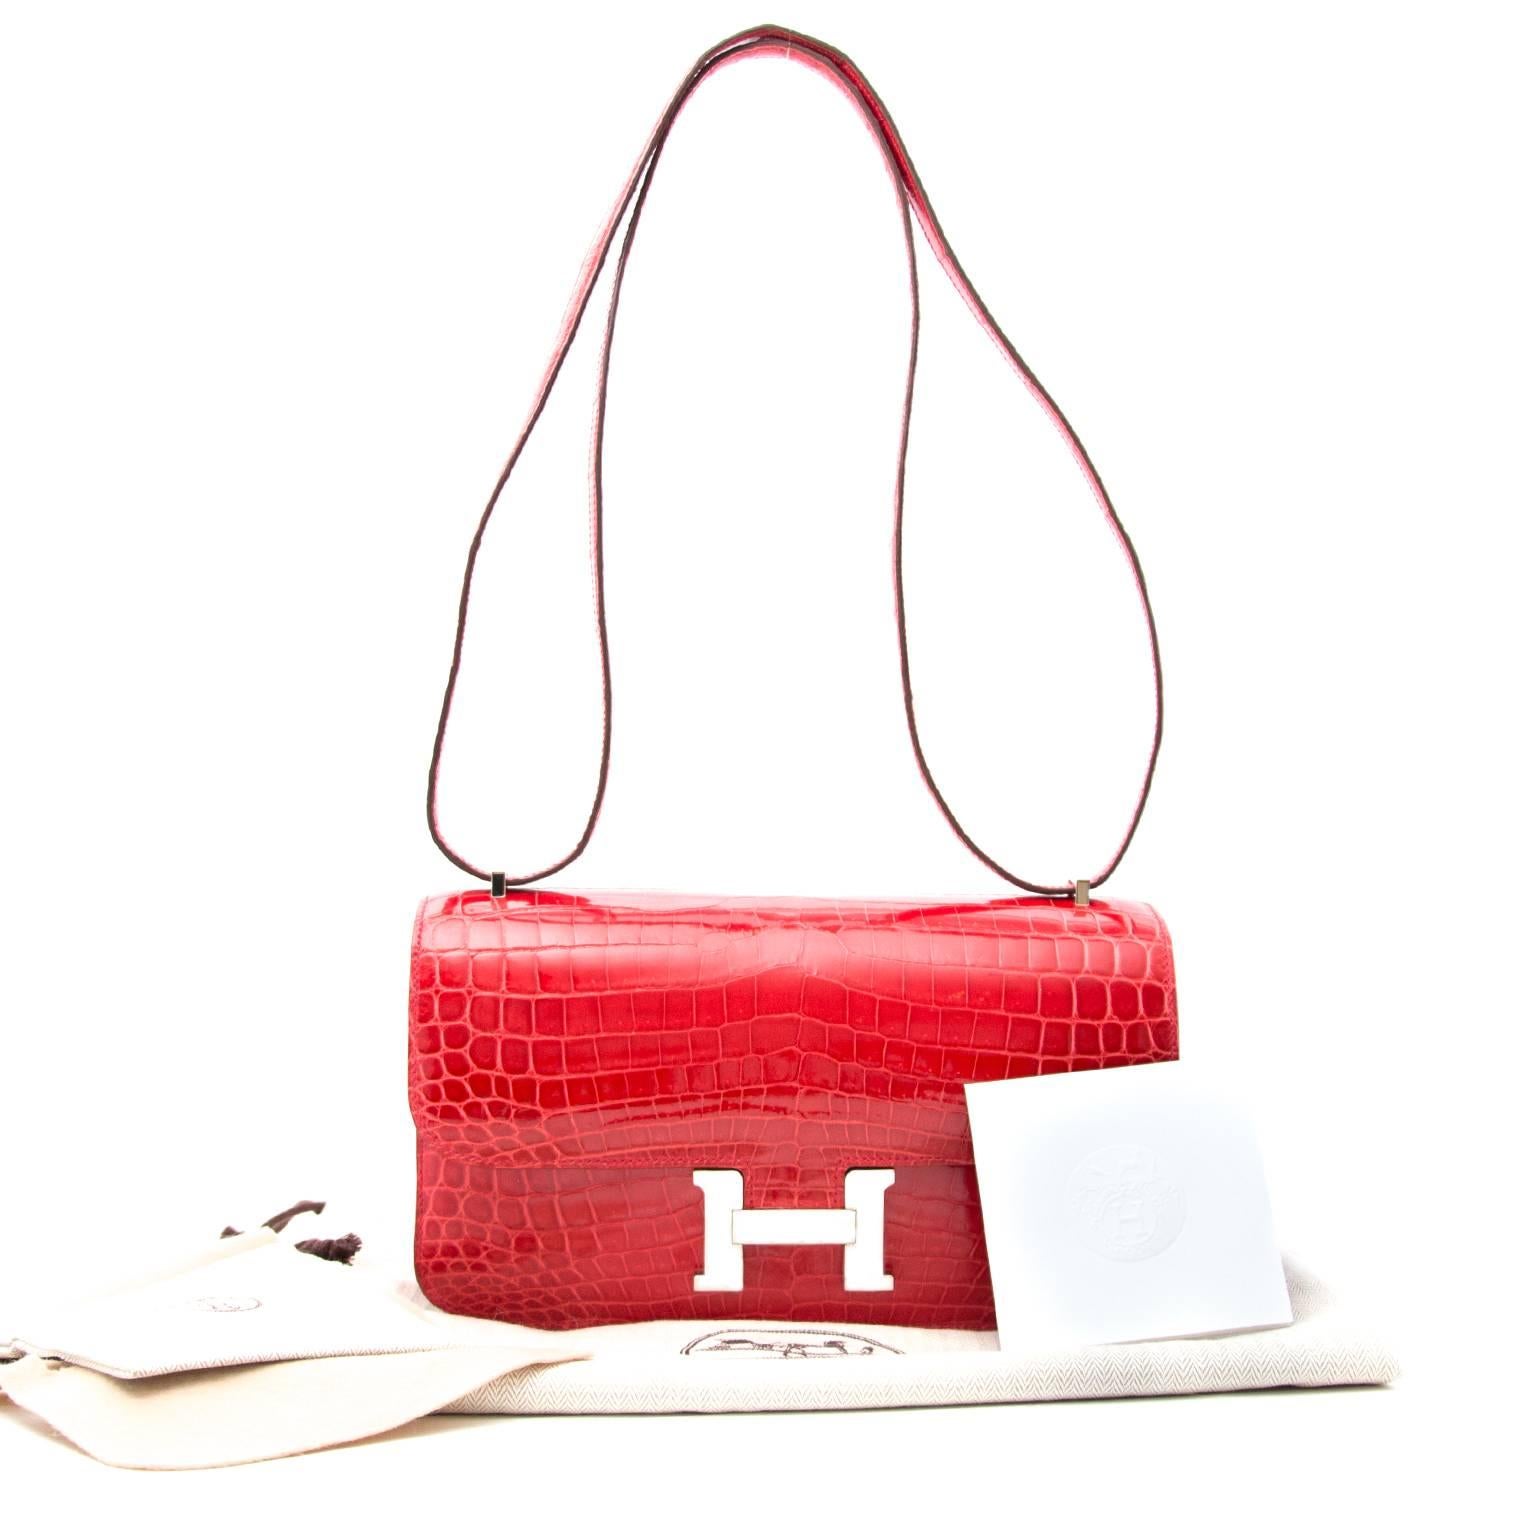 This exquisite hard to find Hermès Constance Elan bag is featured in red-toned Bougainvillier color. This bag is made from Niloticus Crocodile skin, which is identified by the dual-dot signature ( ¨ ) in the embossing and originates from the Nile